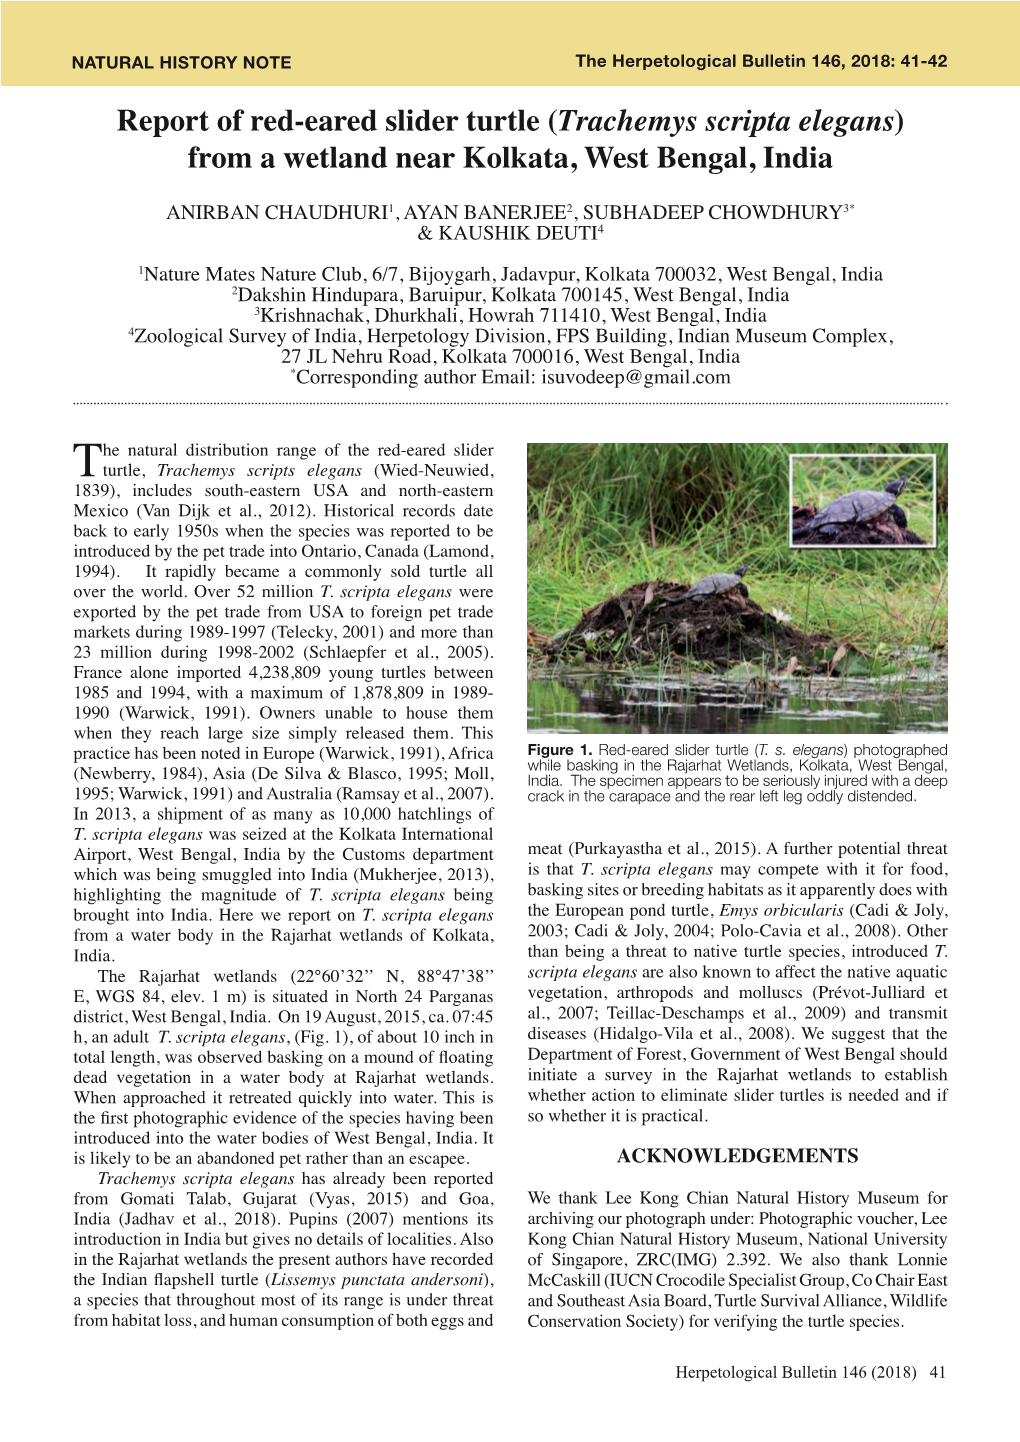 Report of Red-Eared Slider Turtle (Trachemys Scripta Elegans) from a Wetland Near Kolkata, West Bengal, India